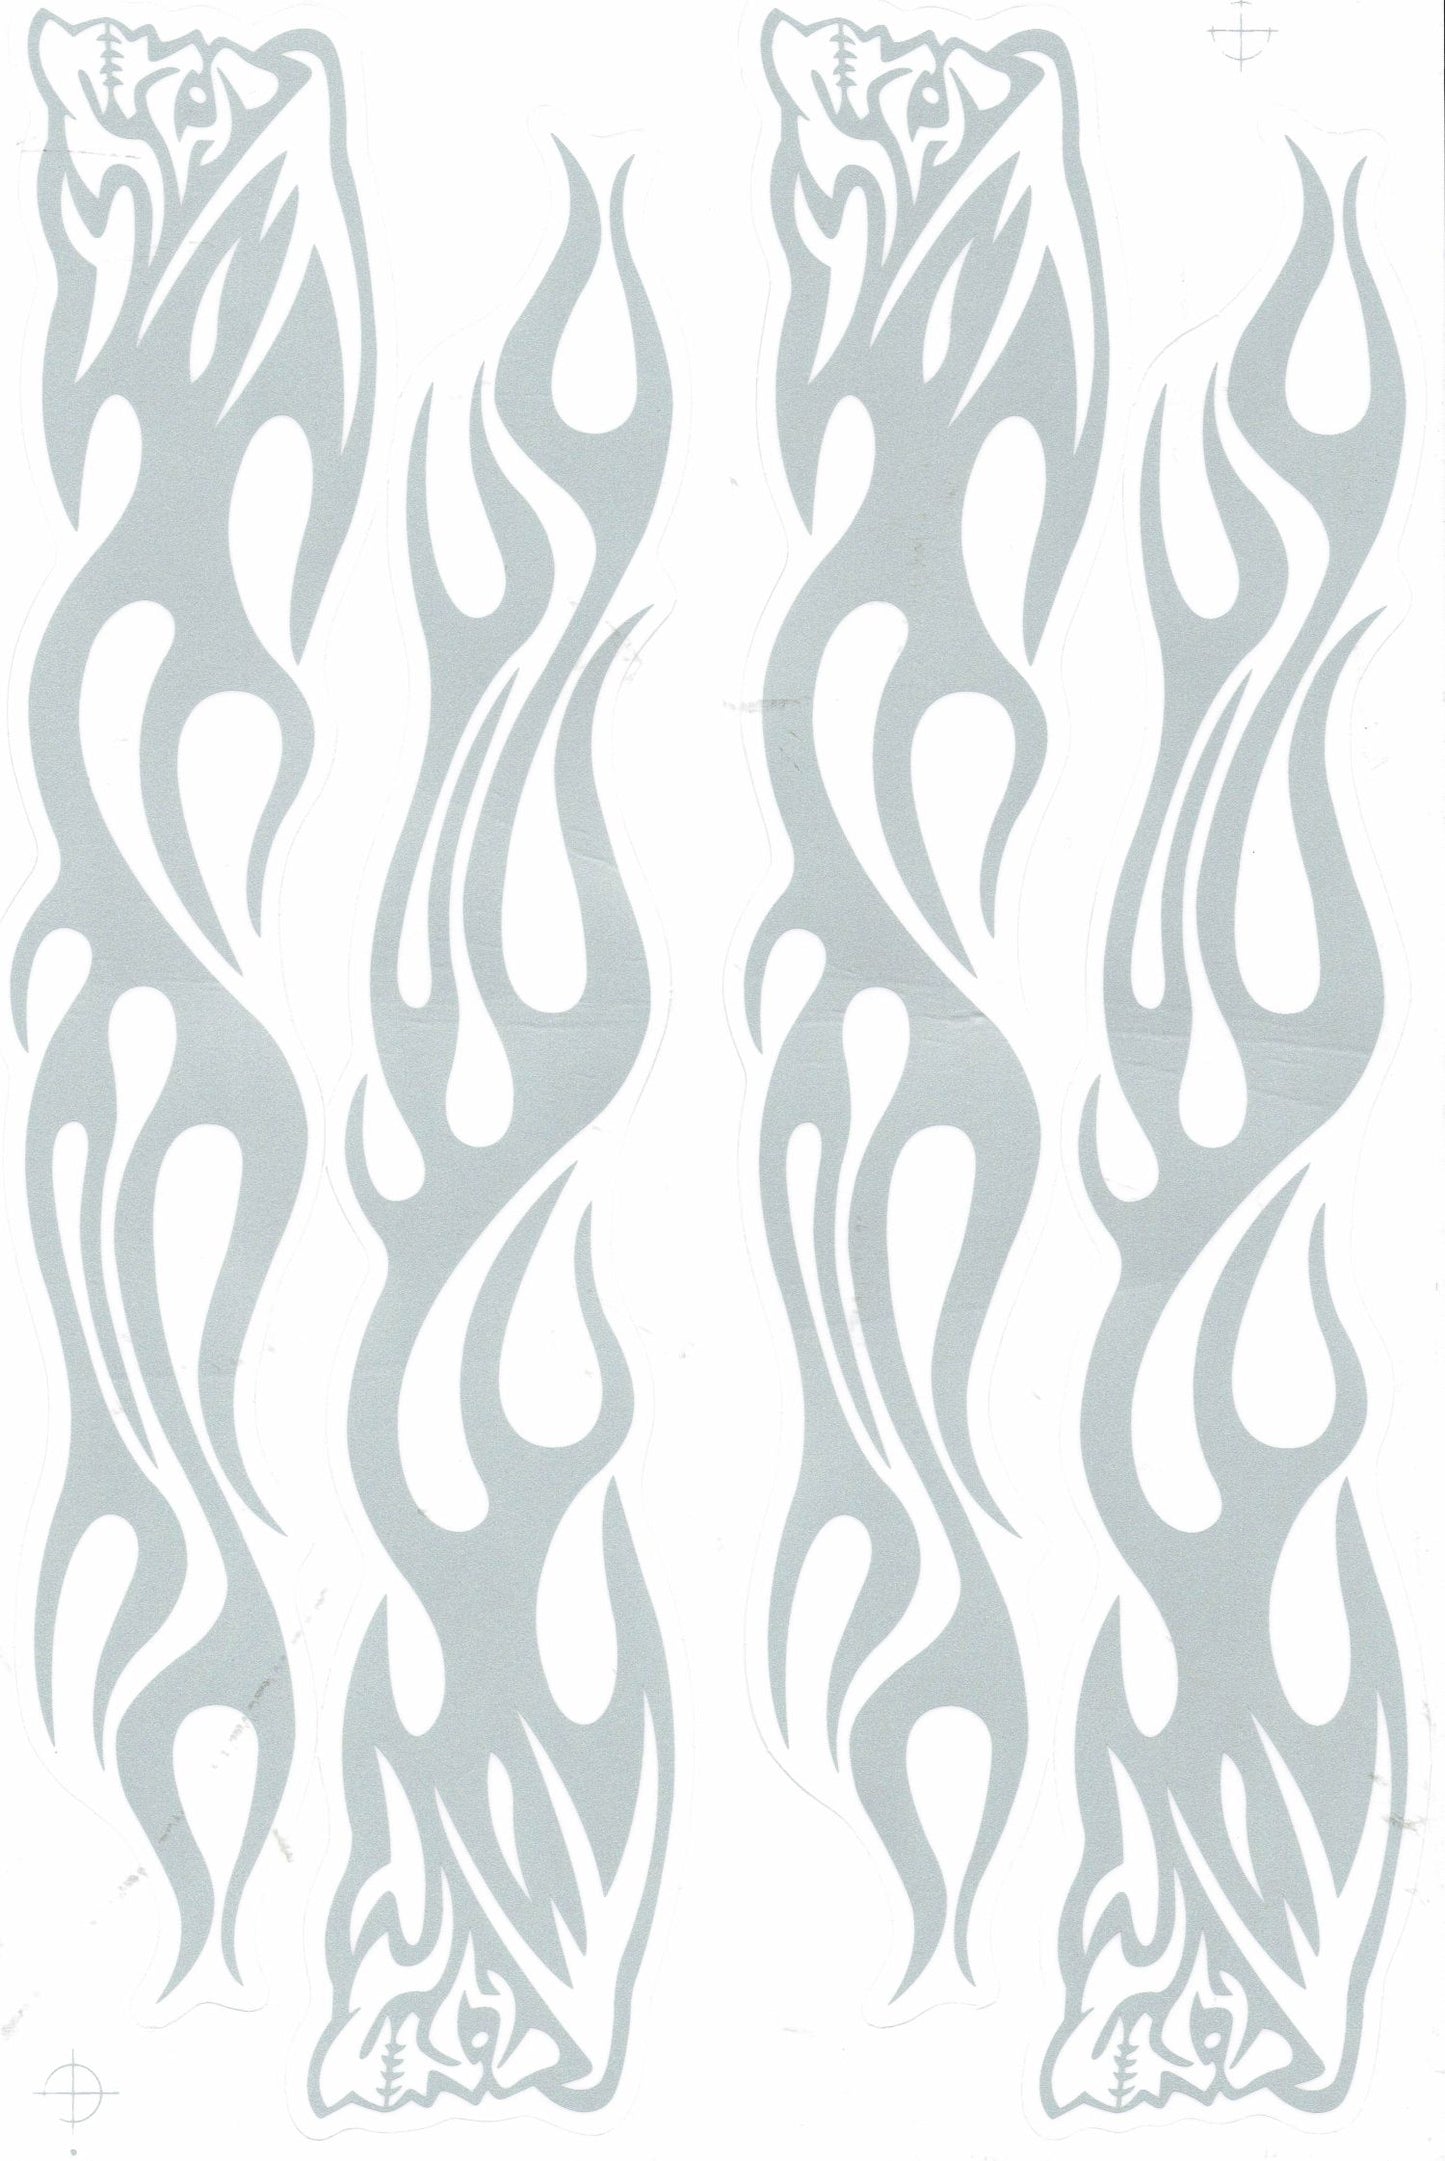 Skull flames fire gray sticker motorcycle scooter skateboard car tuning model building self-adhesive 366